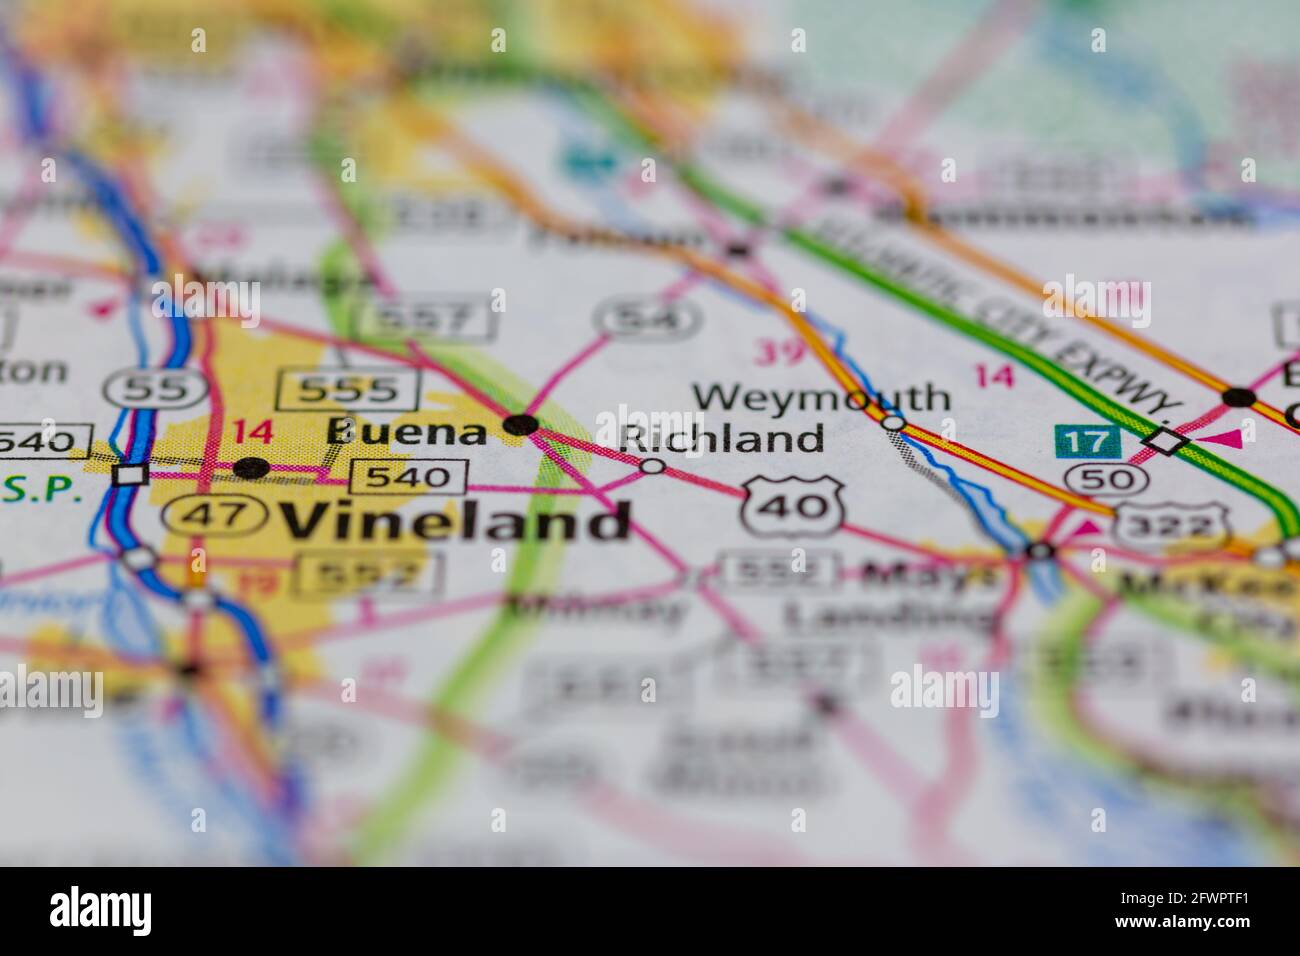 Richland New Jersey USA shown on a Geography map or road map Stock Photo